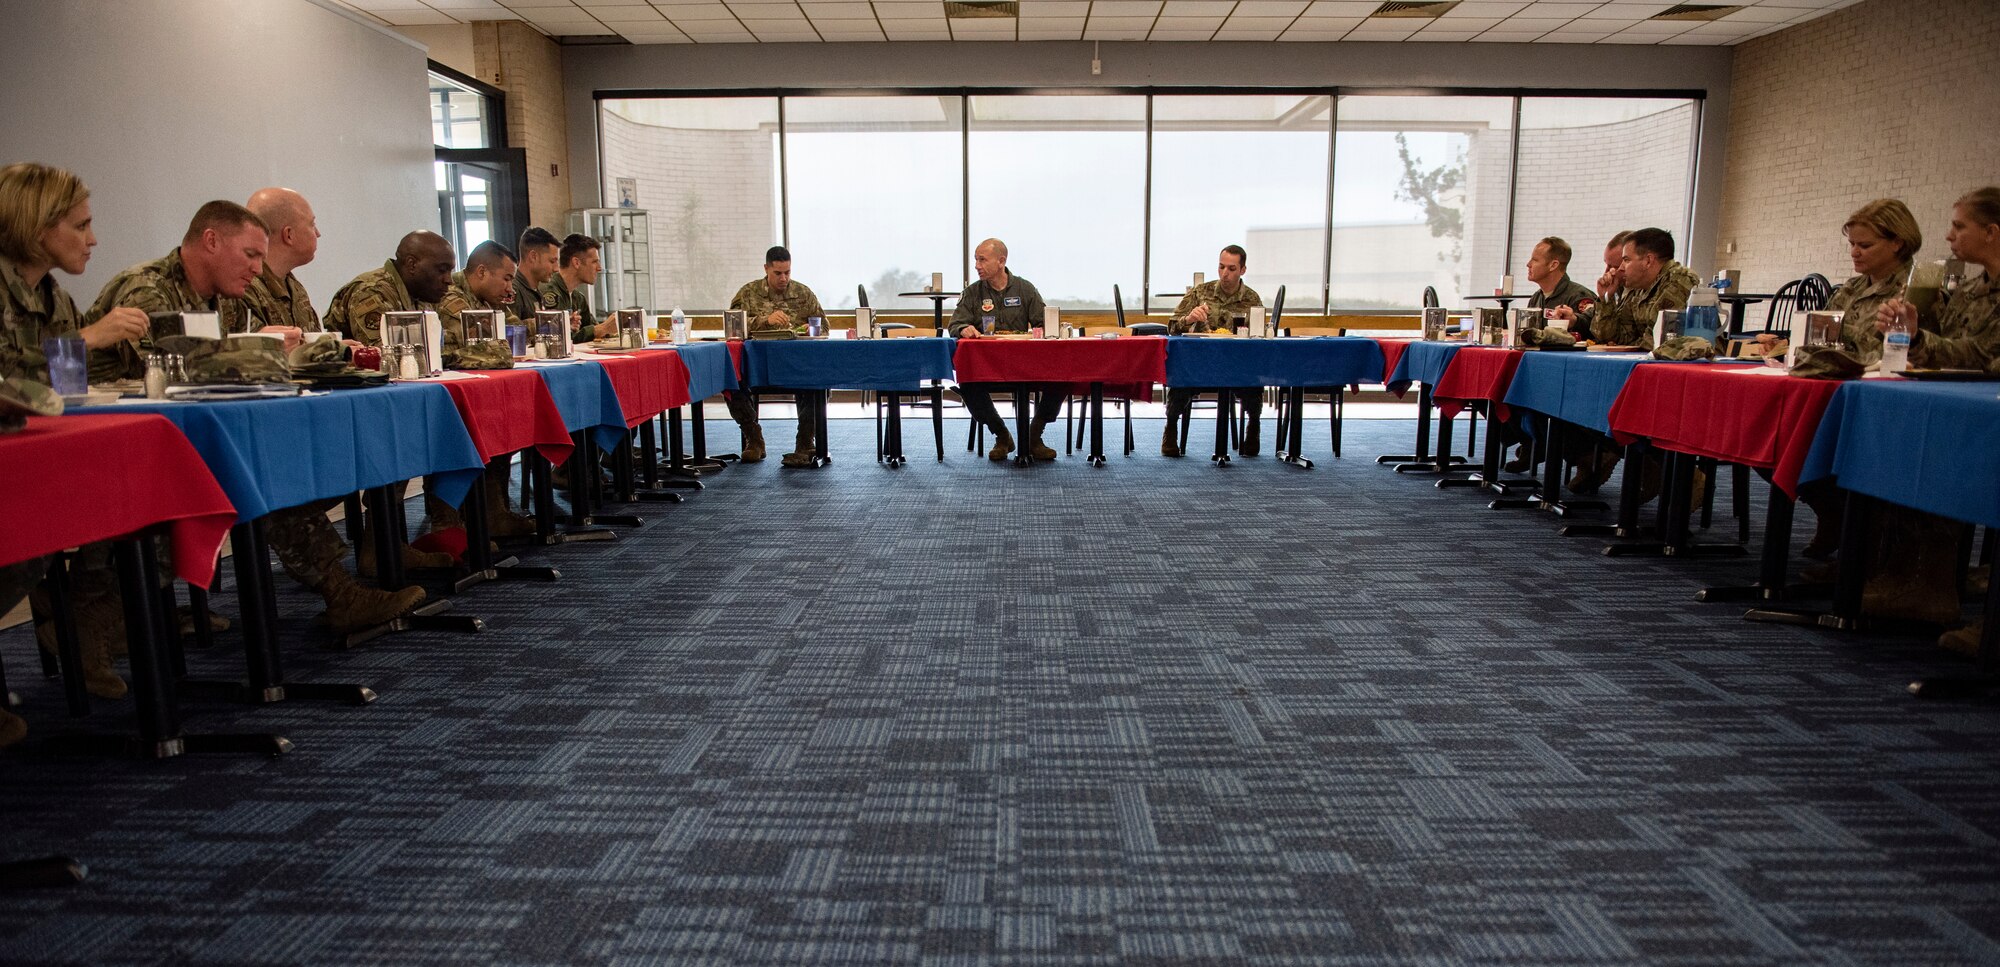 U.S. Air Force Gen. Mike Holmes, the commander of Air Combat Command (center), has lunch with 325th Fighter Wing leaders during a tour at Tyndall Air Force Base, Florida, Feb. 25, 2020. Gen. Holmes spoke with leadership about the future of ACC and how Tyndall fits into that vision. (U.S. Air Force photo by Staff Sgt. Magen M. Reeves)